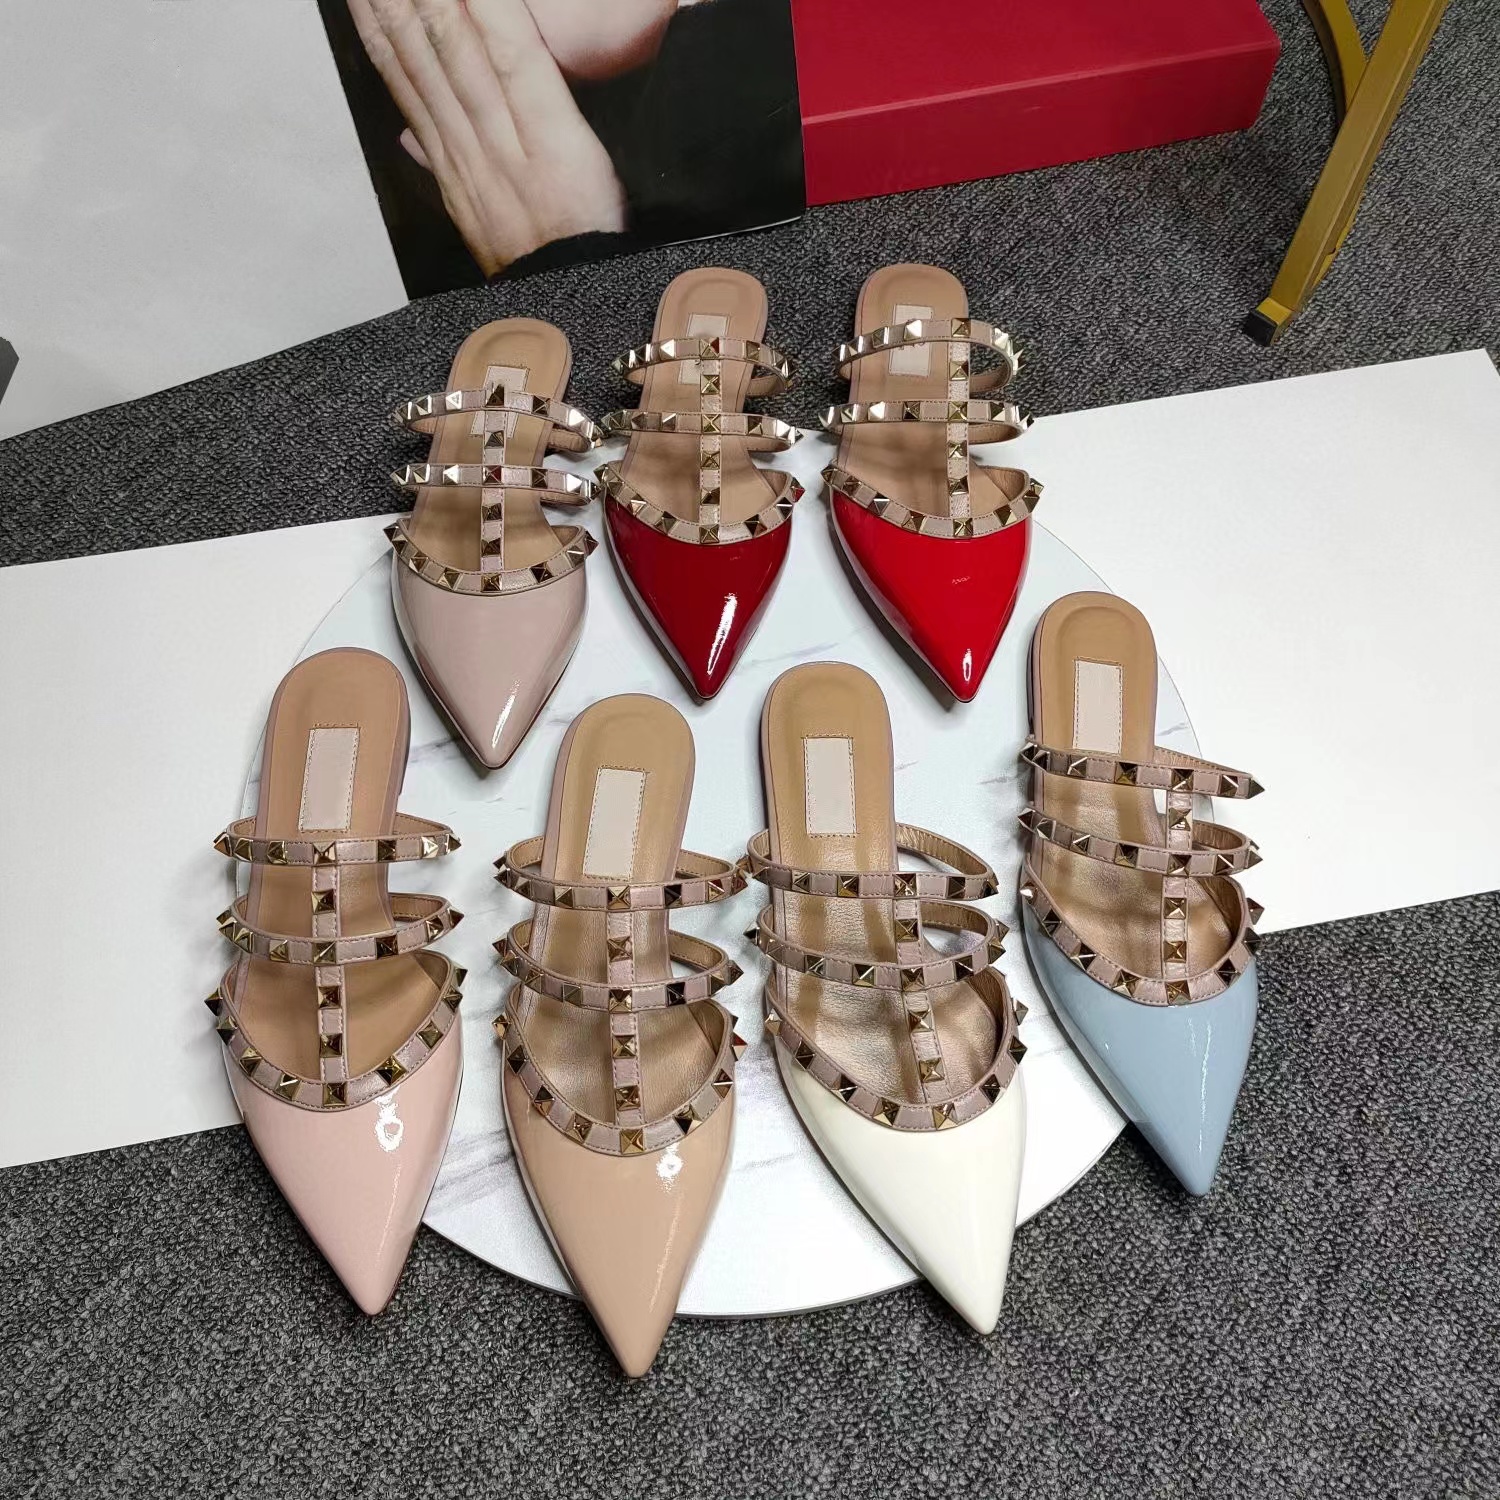 

high quality Luxury Designer heeles Dress shoes red bottoms Heels woman sandals Casual Gold matt leather studded spikes slingback high Wedding party 35-42 with box